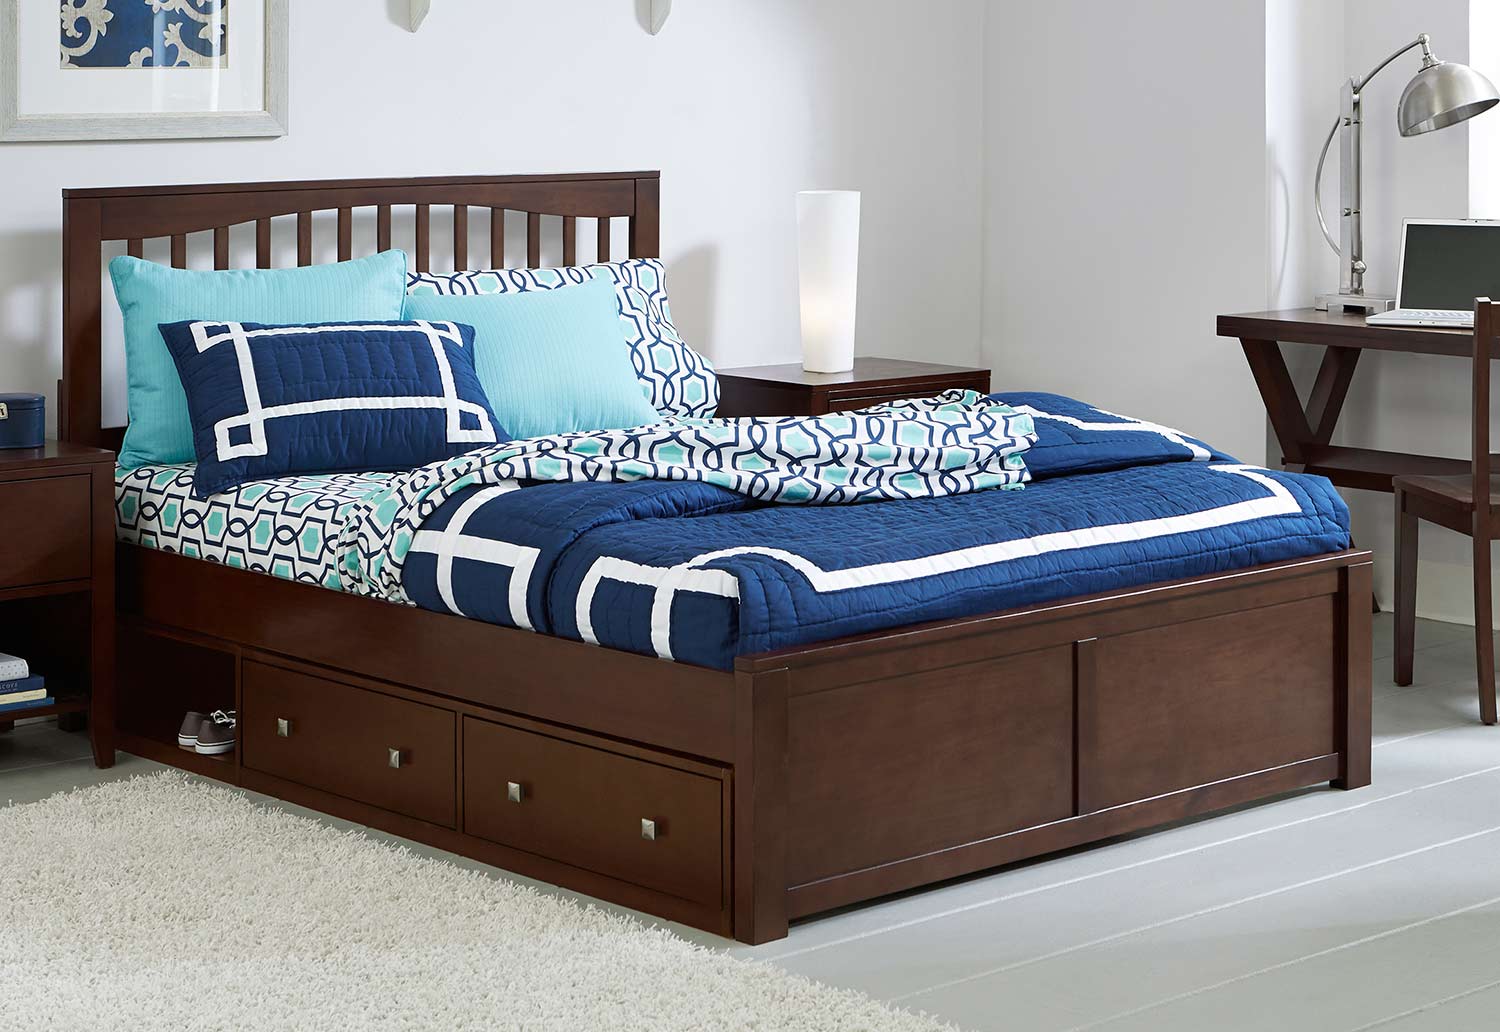 NE Kids Pulse Mission Bed With Storage - Chocolate